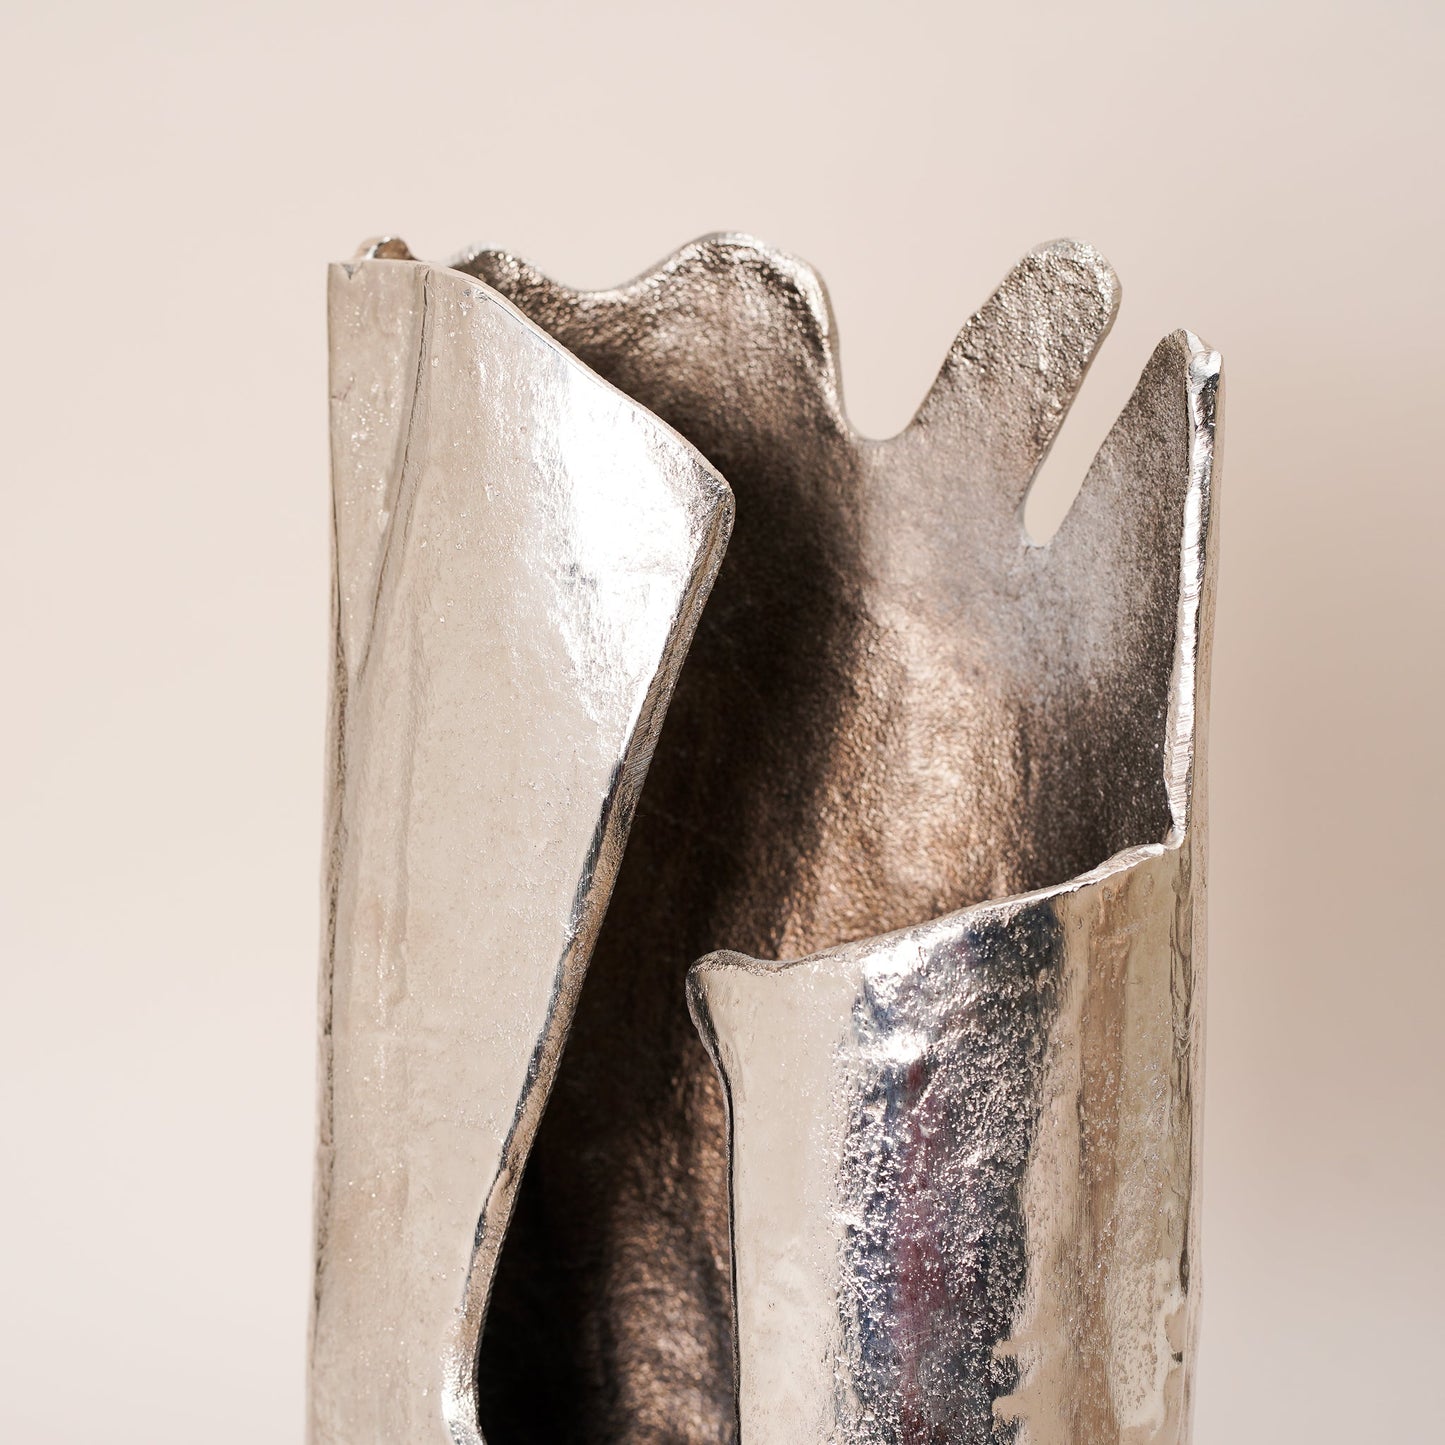 Abstract Vase - SILVER